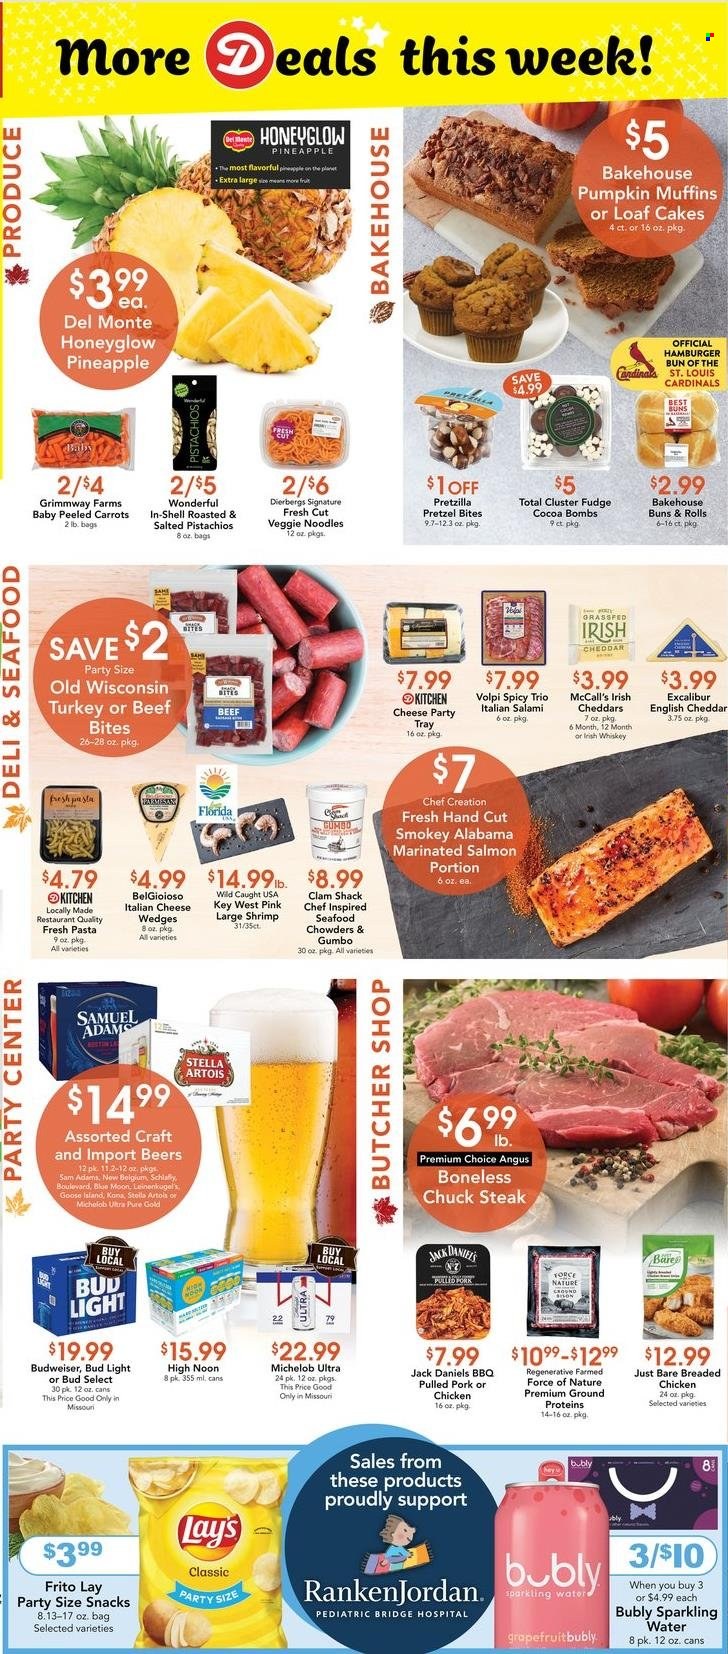 thumbnail - Dierbergs Flyer - 09/27/2022 - 10/03/2022 - Sales products - pretzels, cake, buns, burger buns, muffin, carrots, pumpkin, pineapple, clams, salmon, shrimps, Jack Daniel's, fried chicken, noodles, pulled pork, salami, cheddar, cheese, fudge, snack, Cluster Fudge, Lay’s, cocoa, Del Monte, pistachios, sparkling water, whiskey, irish whiskey, whisky, beer, Bud Light, beef meat, steak, chuck steak, pork meat, Budweiser, Leinenkugel's, Stella Artois, Blue Moon, Michelob. Page 6.